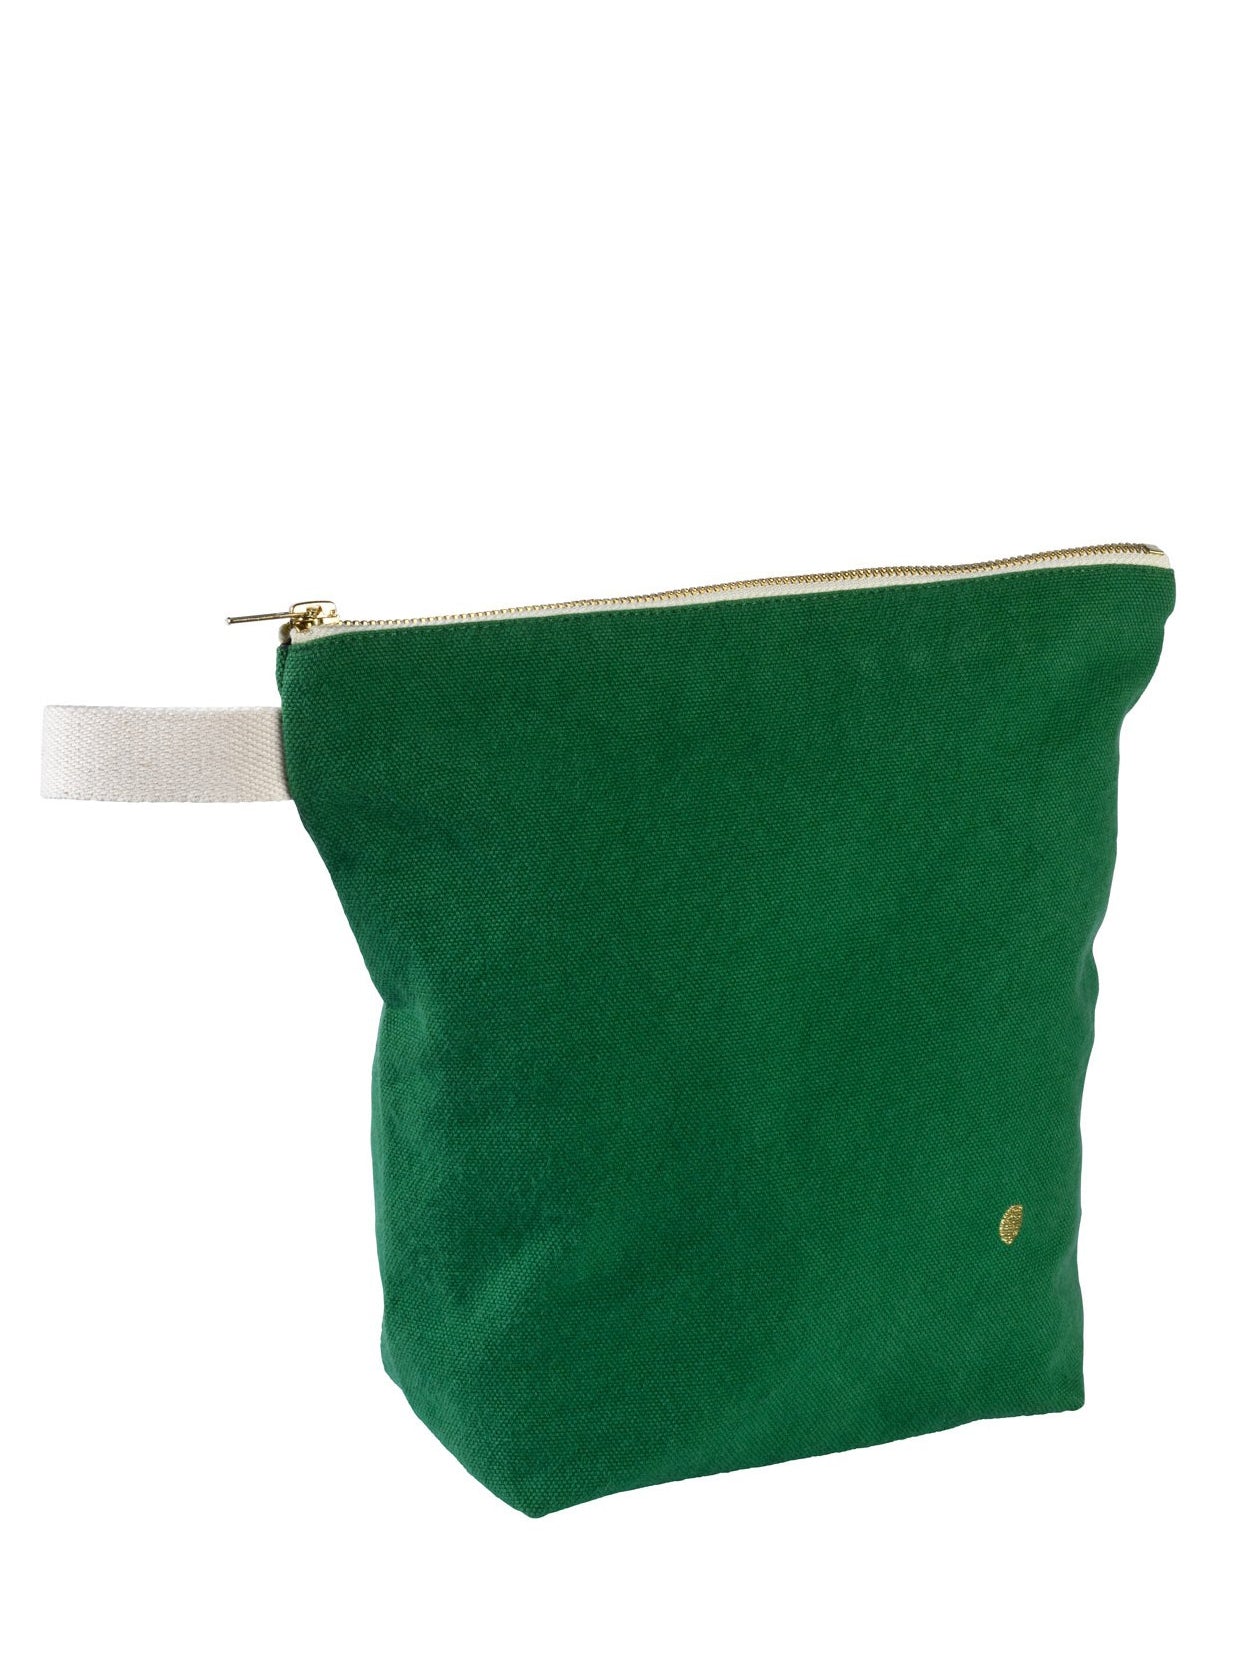 TOILETRY BAG IONA, grass green (large)